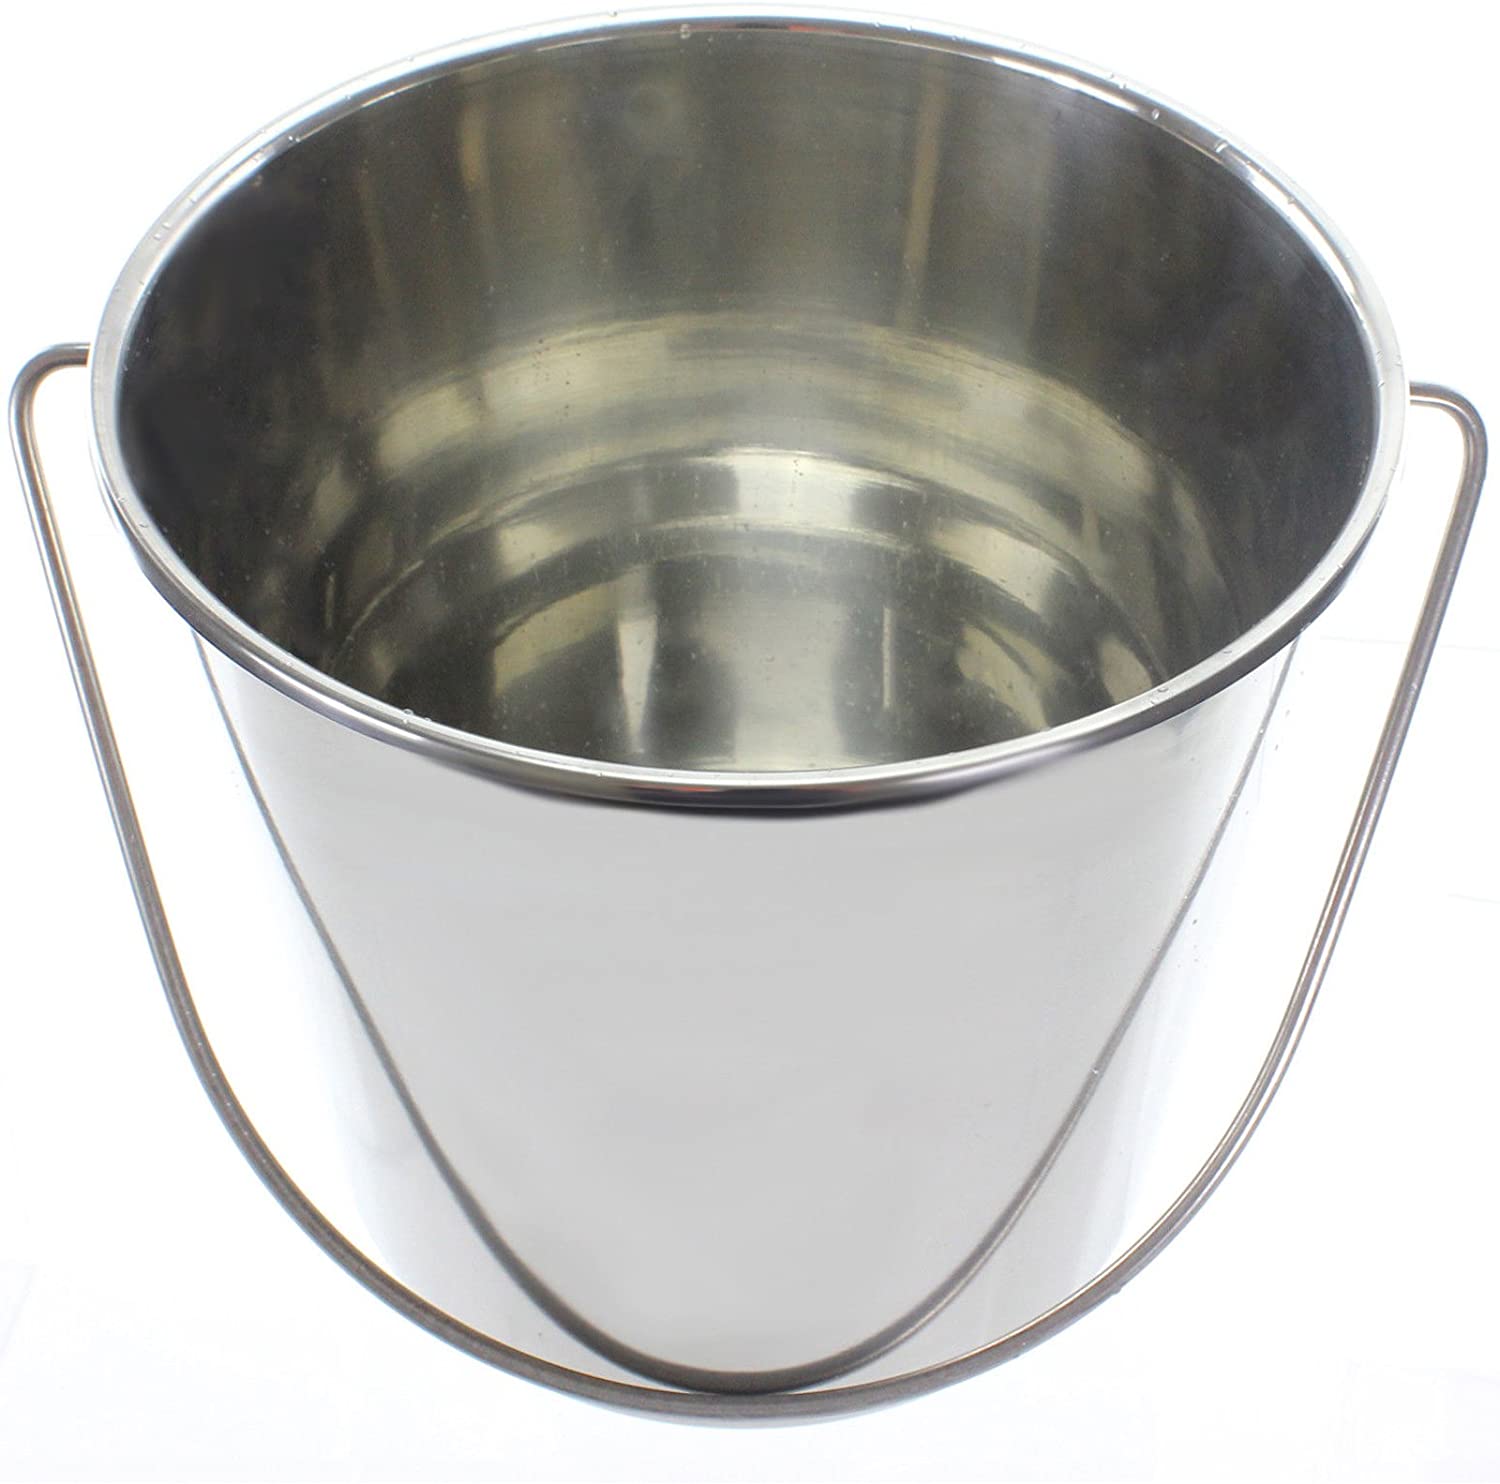 12 Litre Feed Feeding Watering Bucket for Horse Equestrian Stable (Pack of 5)